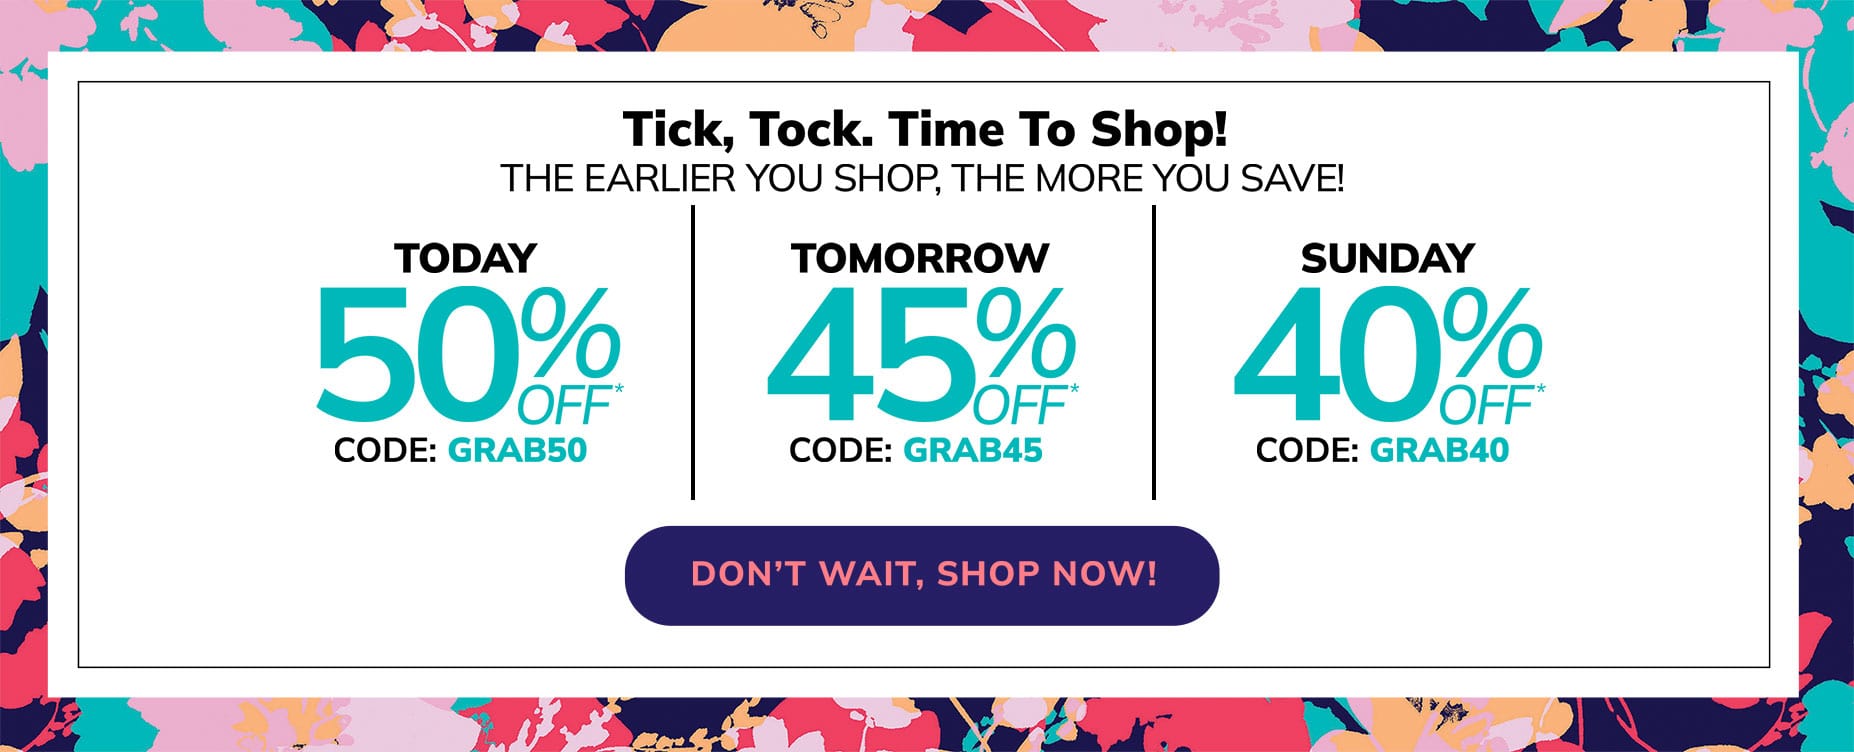 tick tock. Time to shop